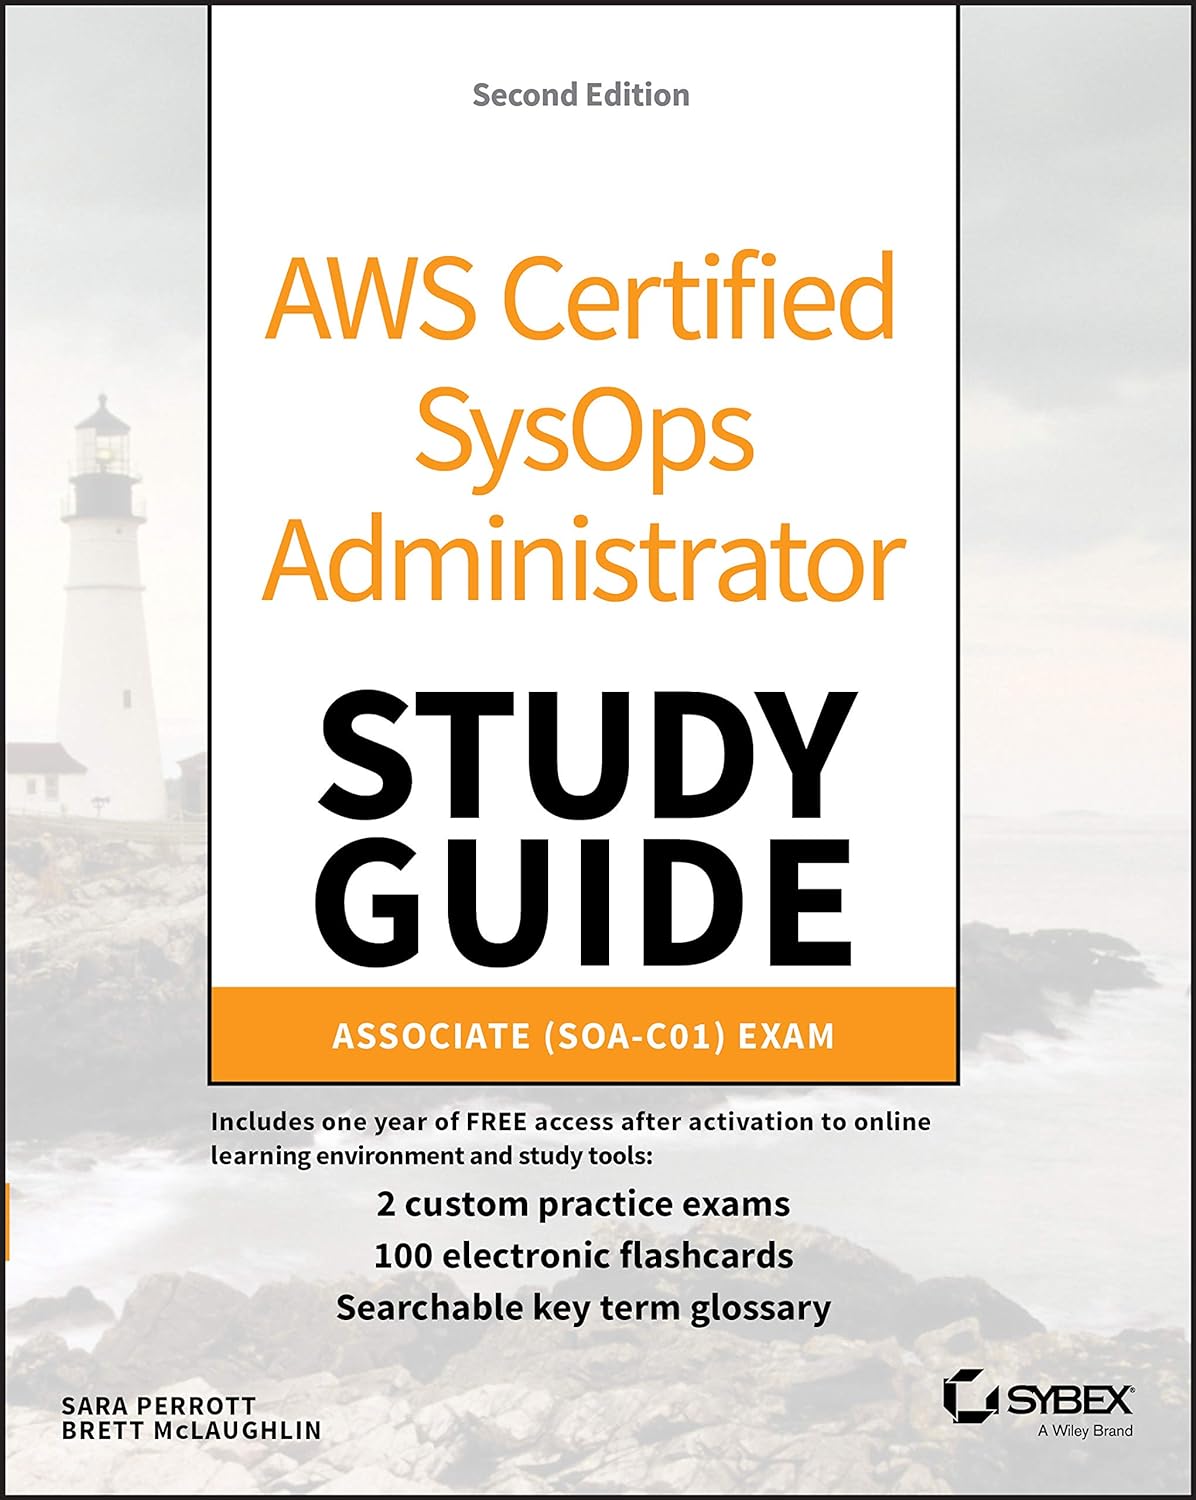 Flash Sale Alert! AWS Certified SysOps Administrator Study Guide: Associate (SOA-C01) Exam - Limited-Time Specials